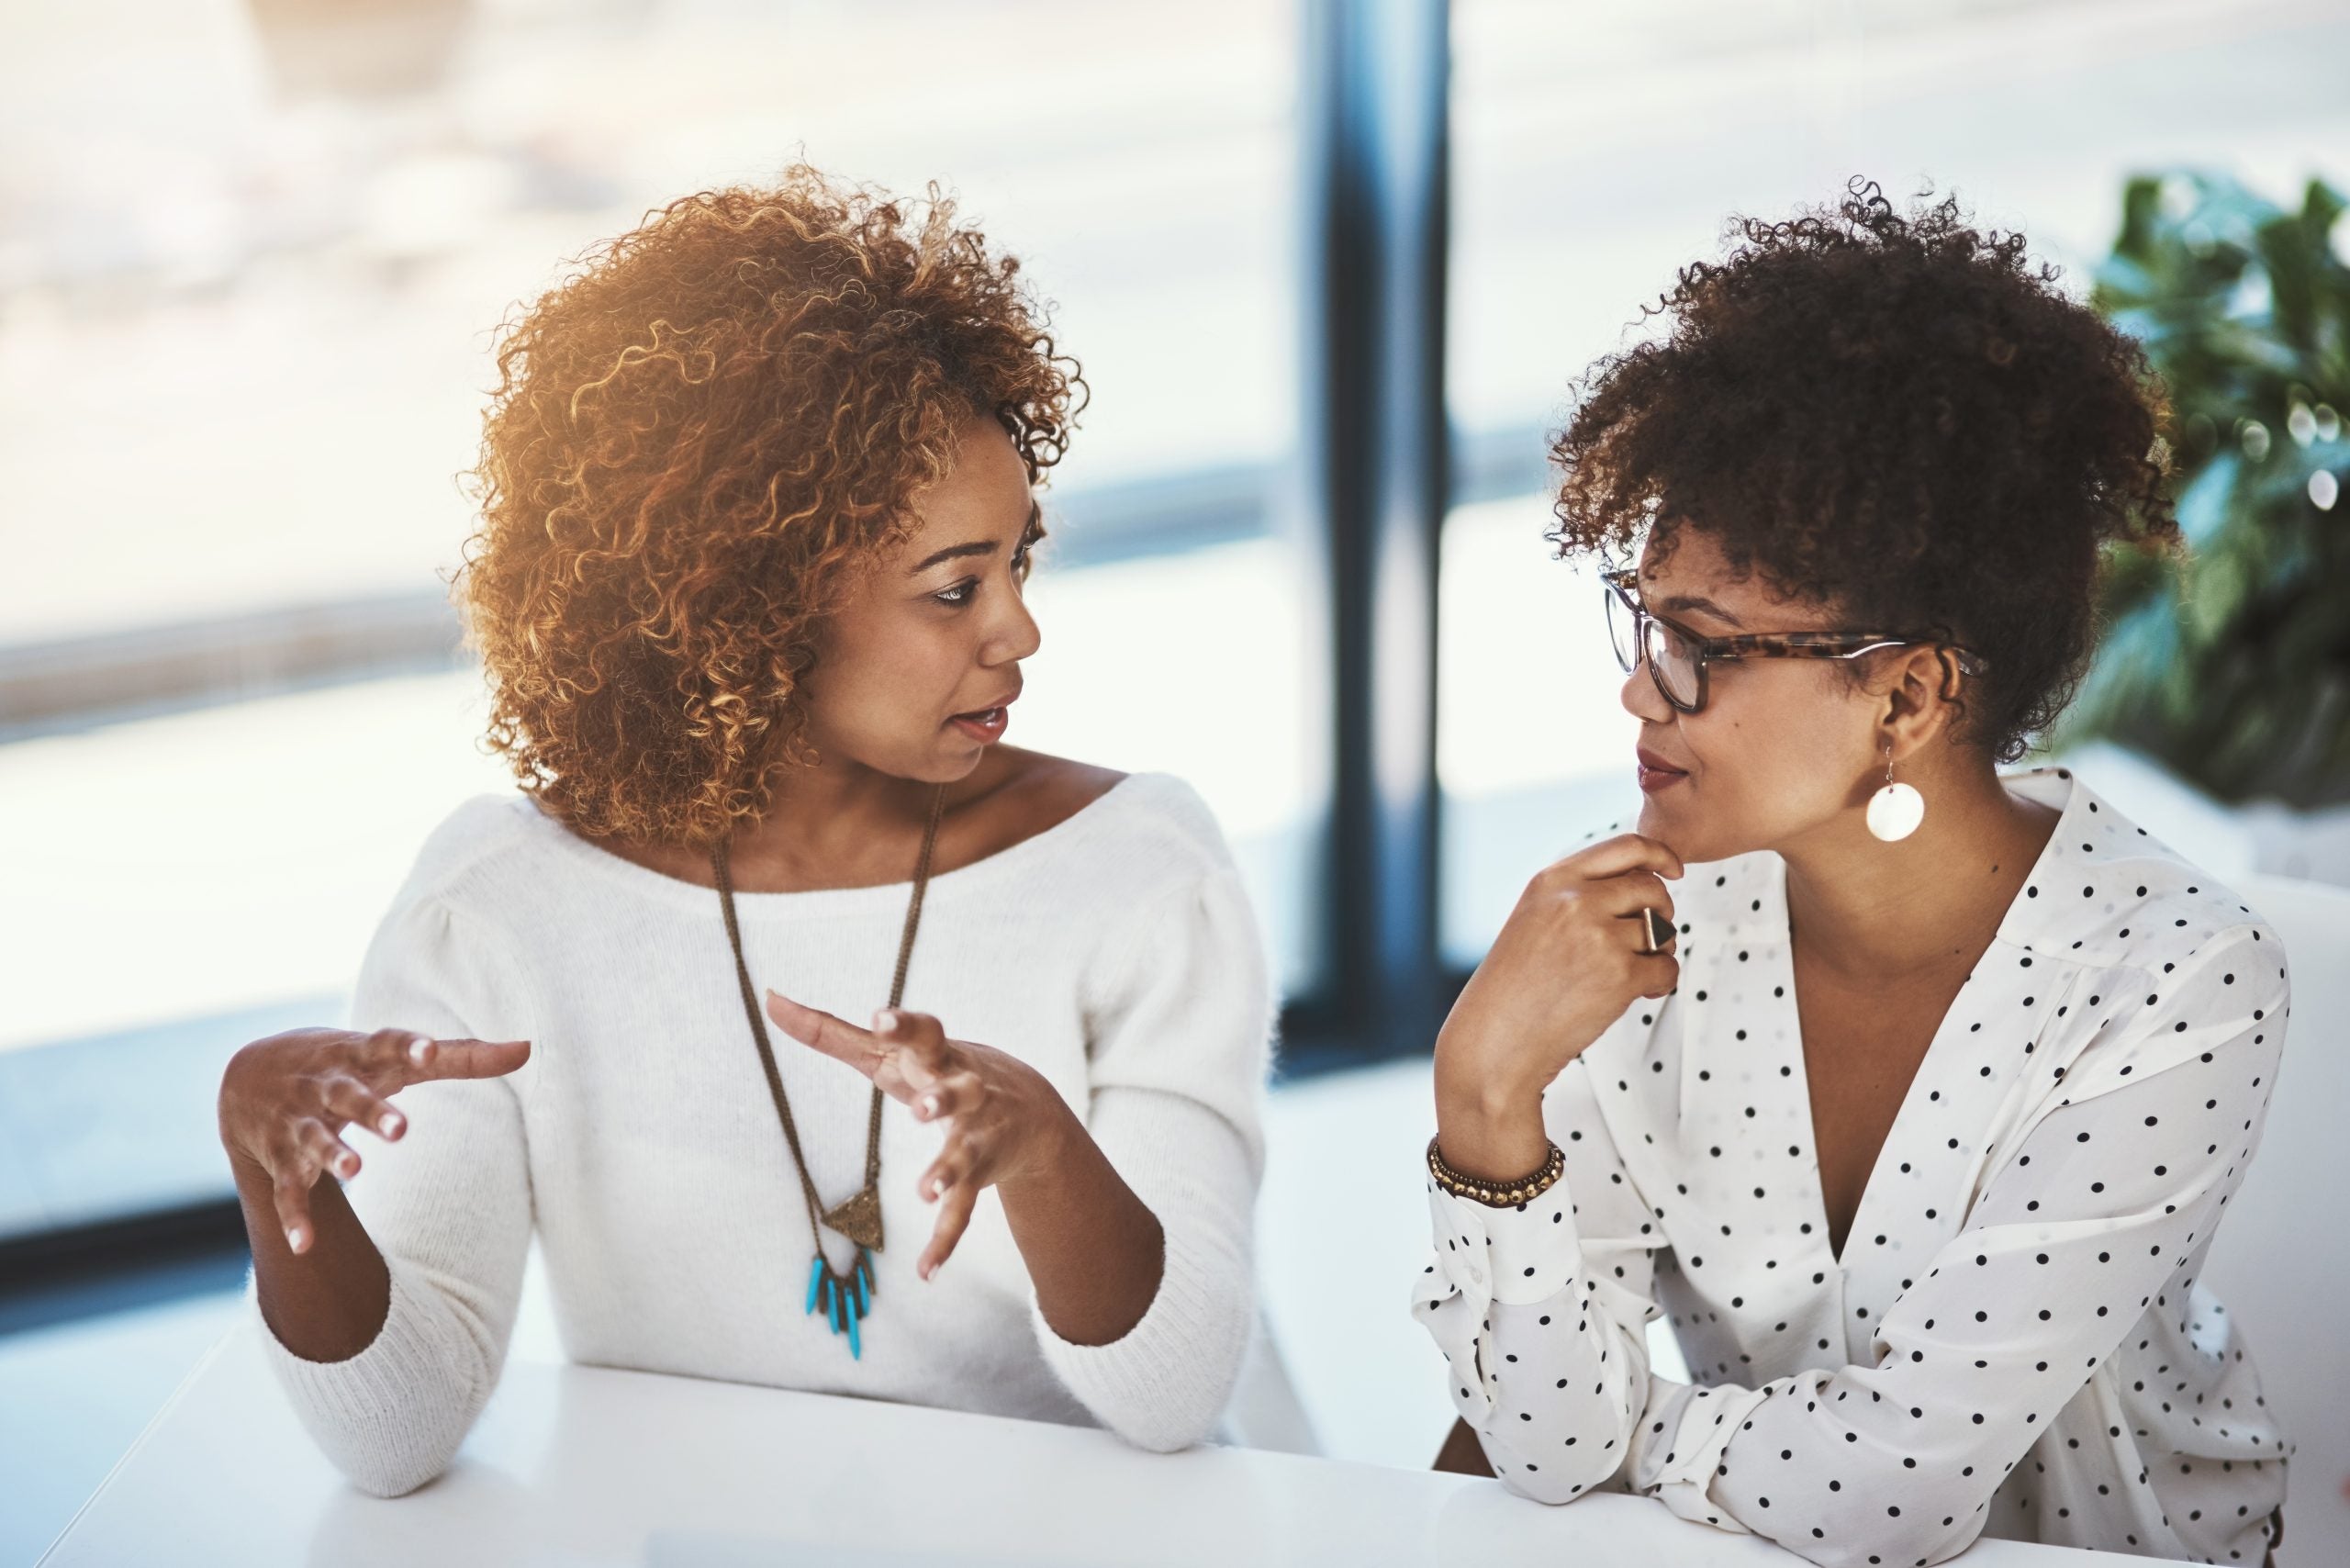 Black Women Executives Share How They Build Authentic Relationships In The Workplace